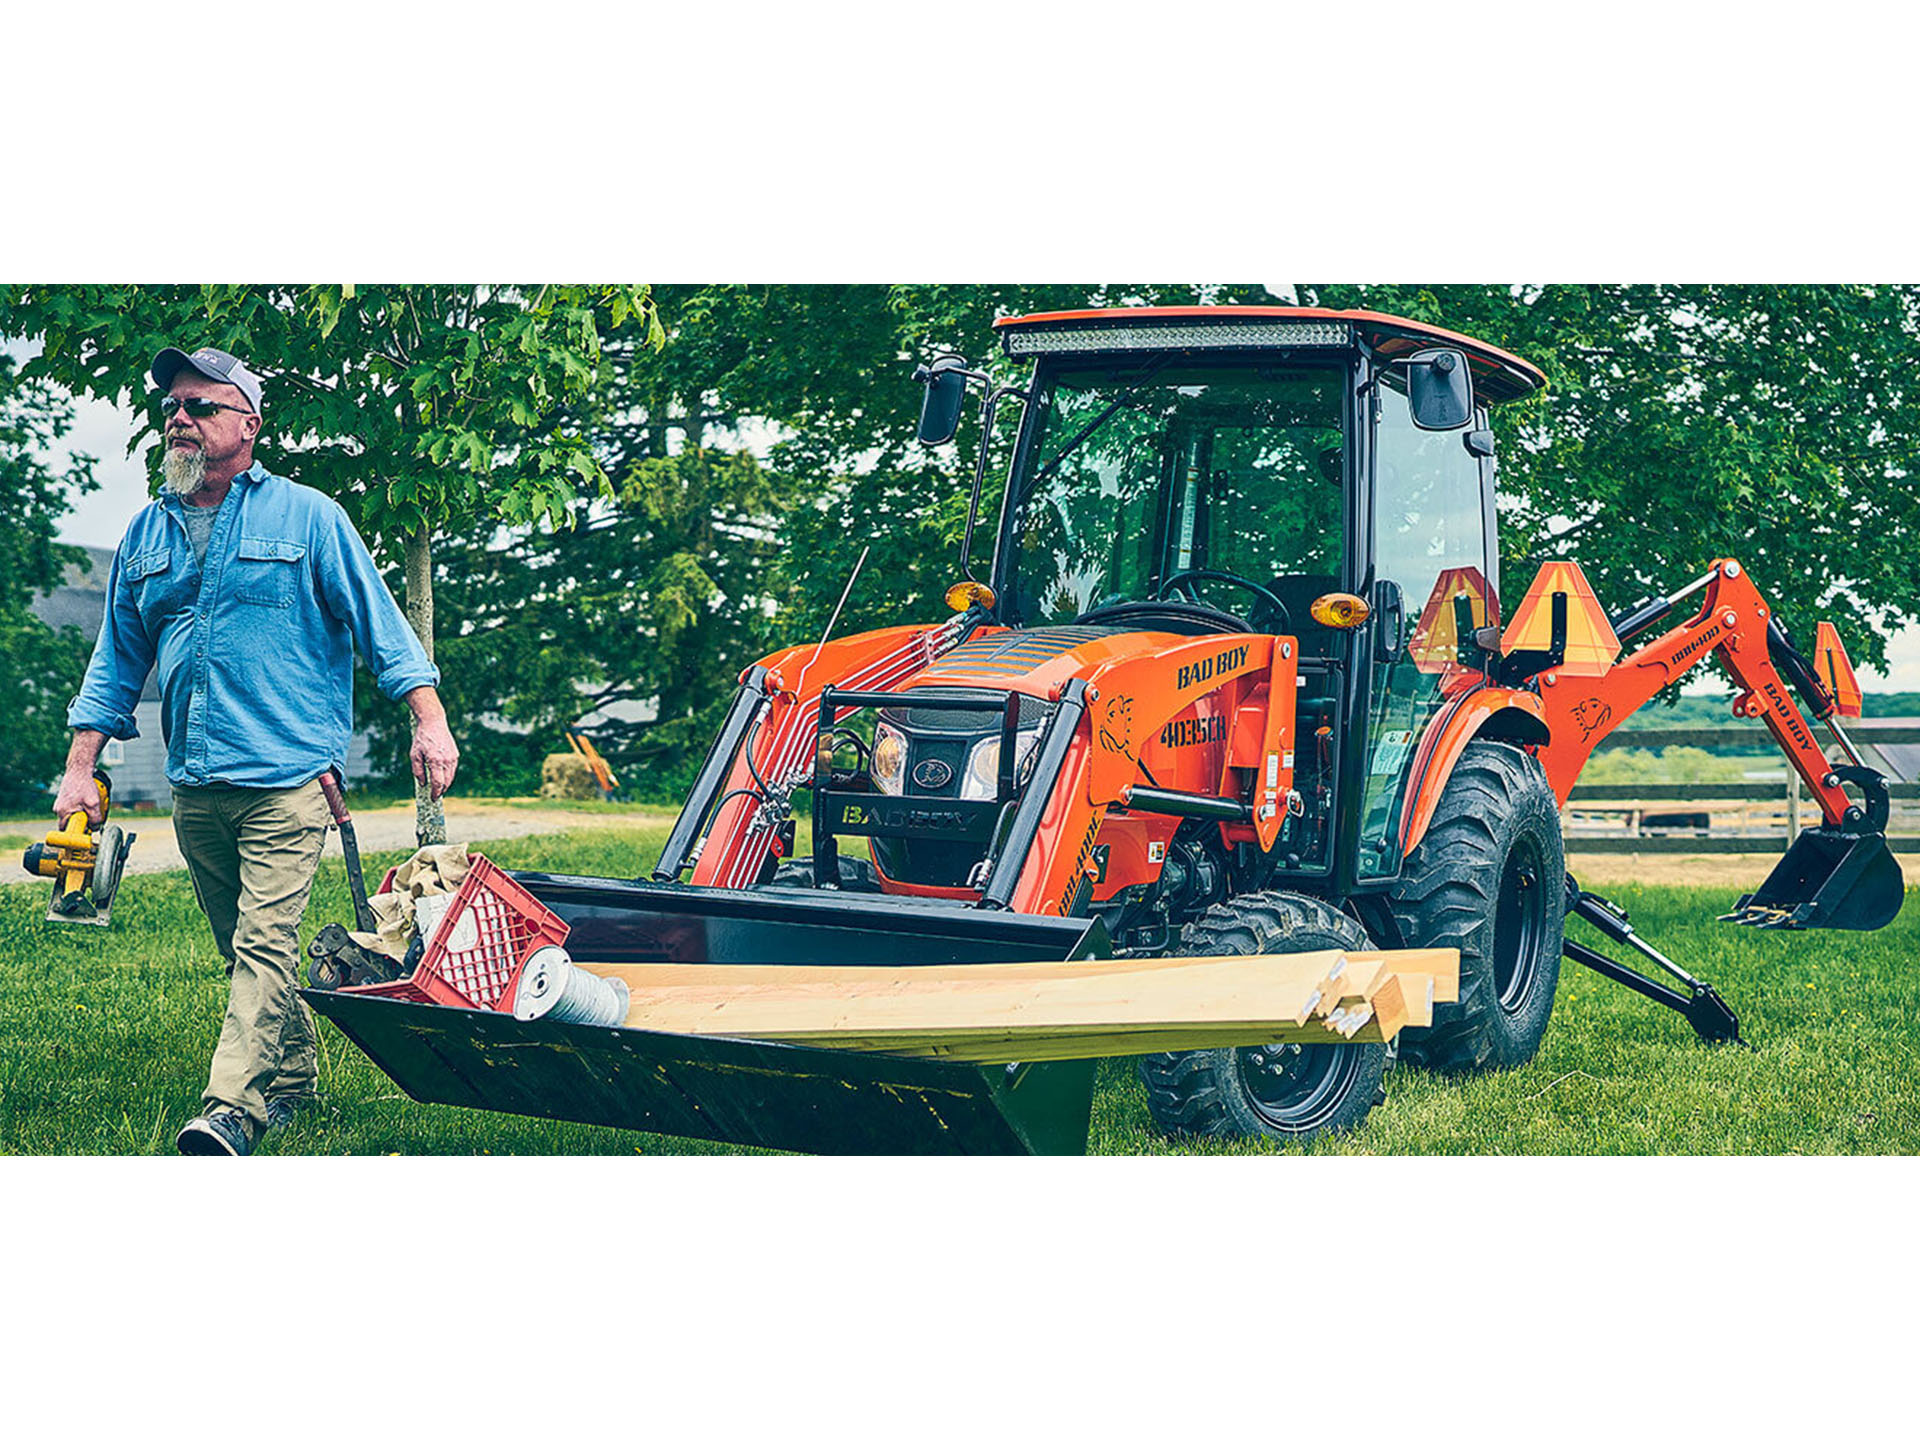 Bad Boy Mowers 4035 Cab with Loader in Lowell, Michigan